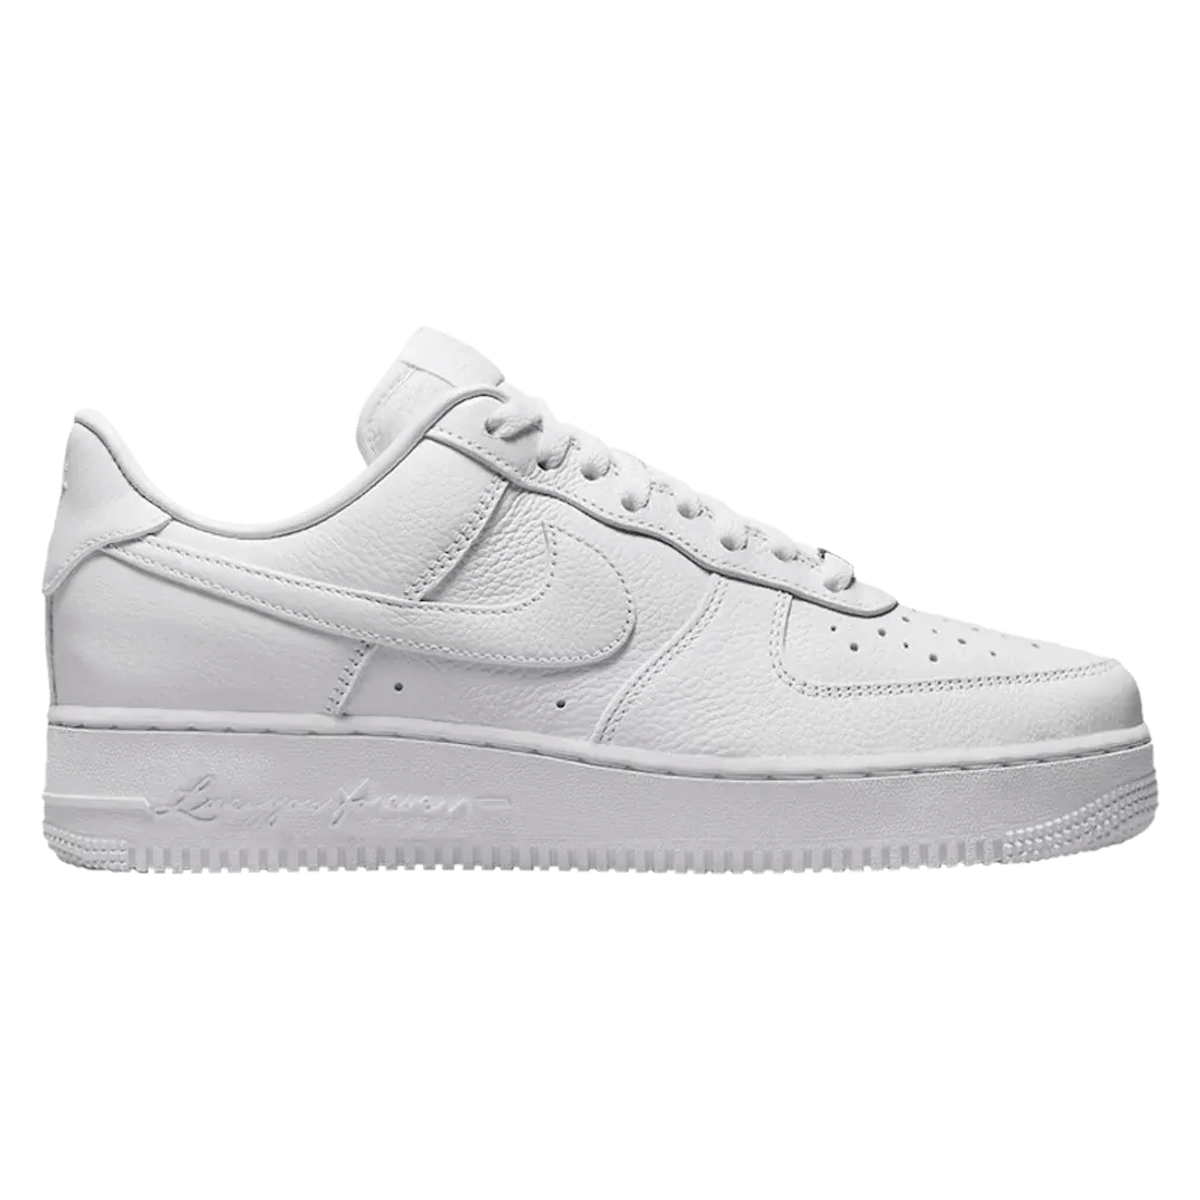 NOCTA x Nike Air Force 1 Low "Certified Lover Boy"